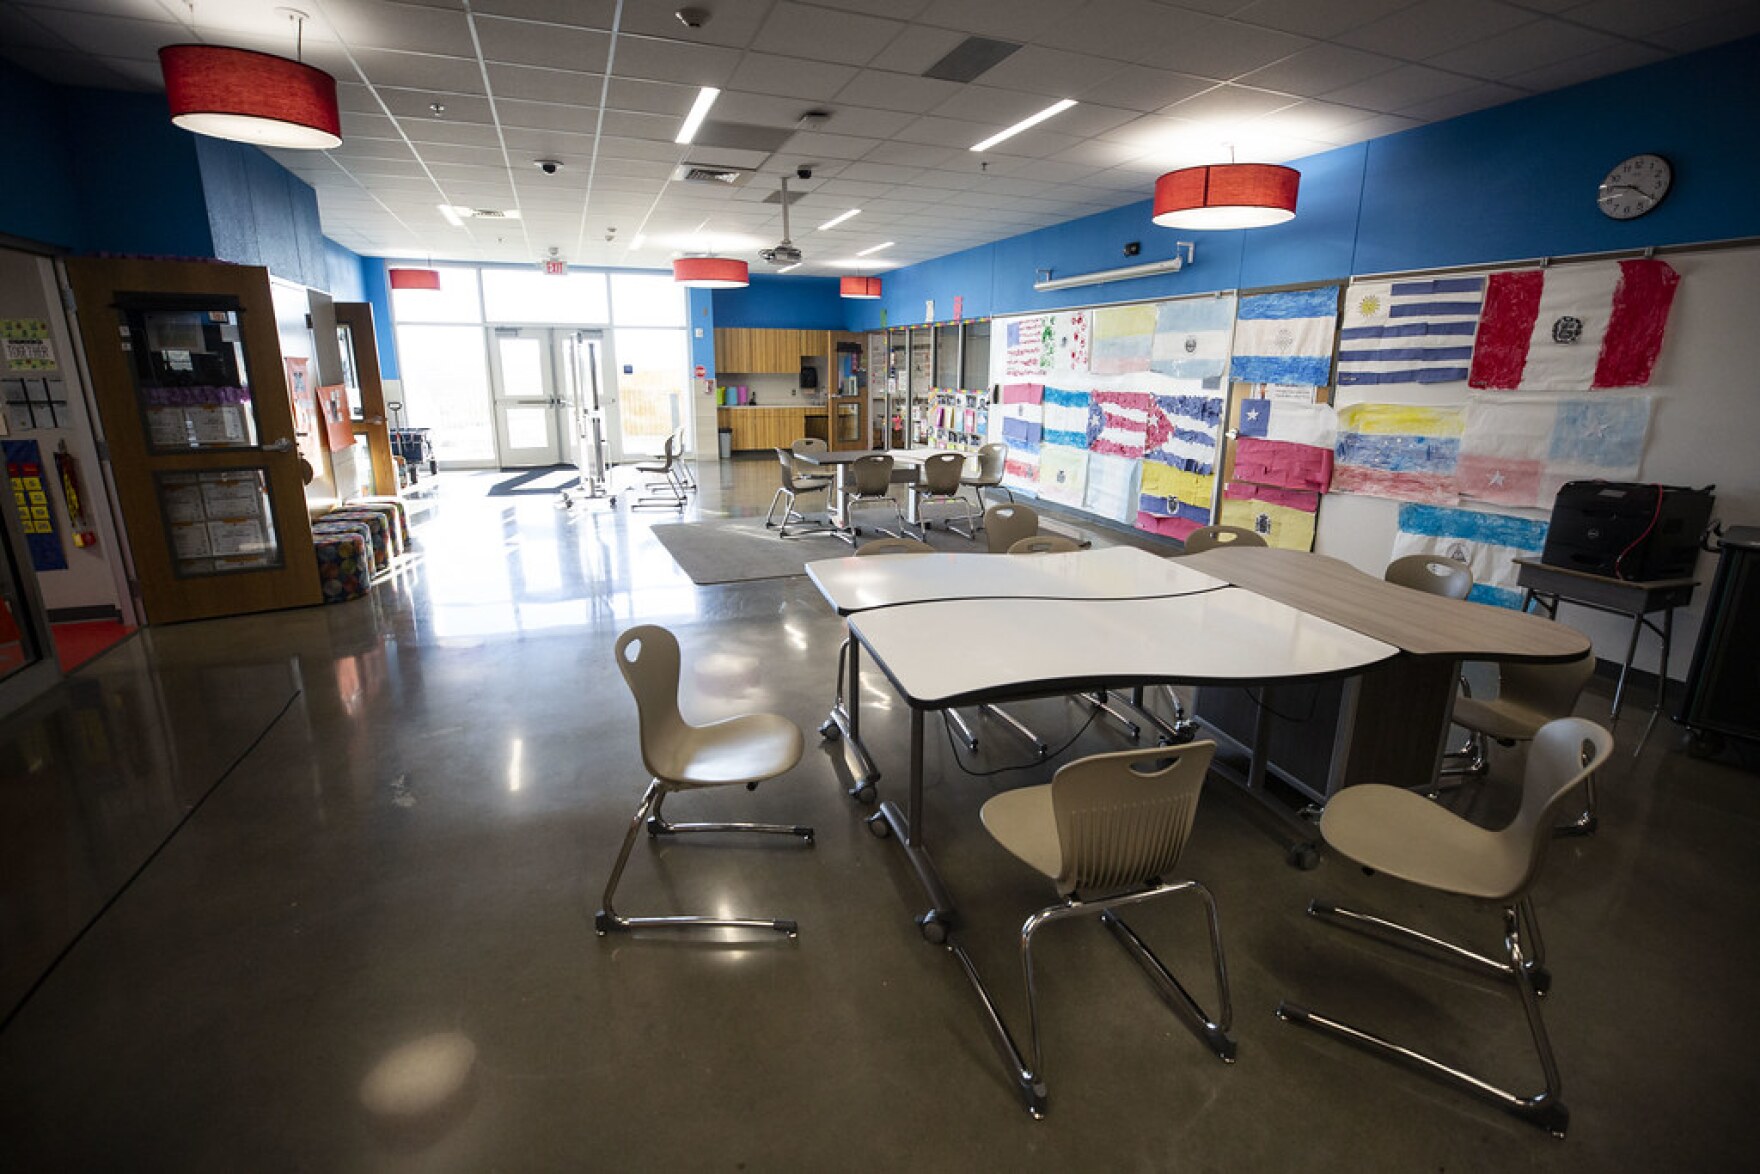 Austin Isd Approves 19 Billion Budget But Nearly Half Of That Money Will Go To The State 3484